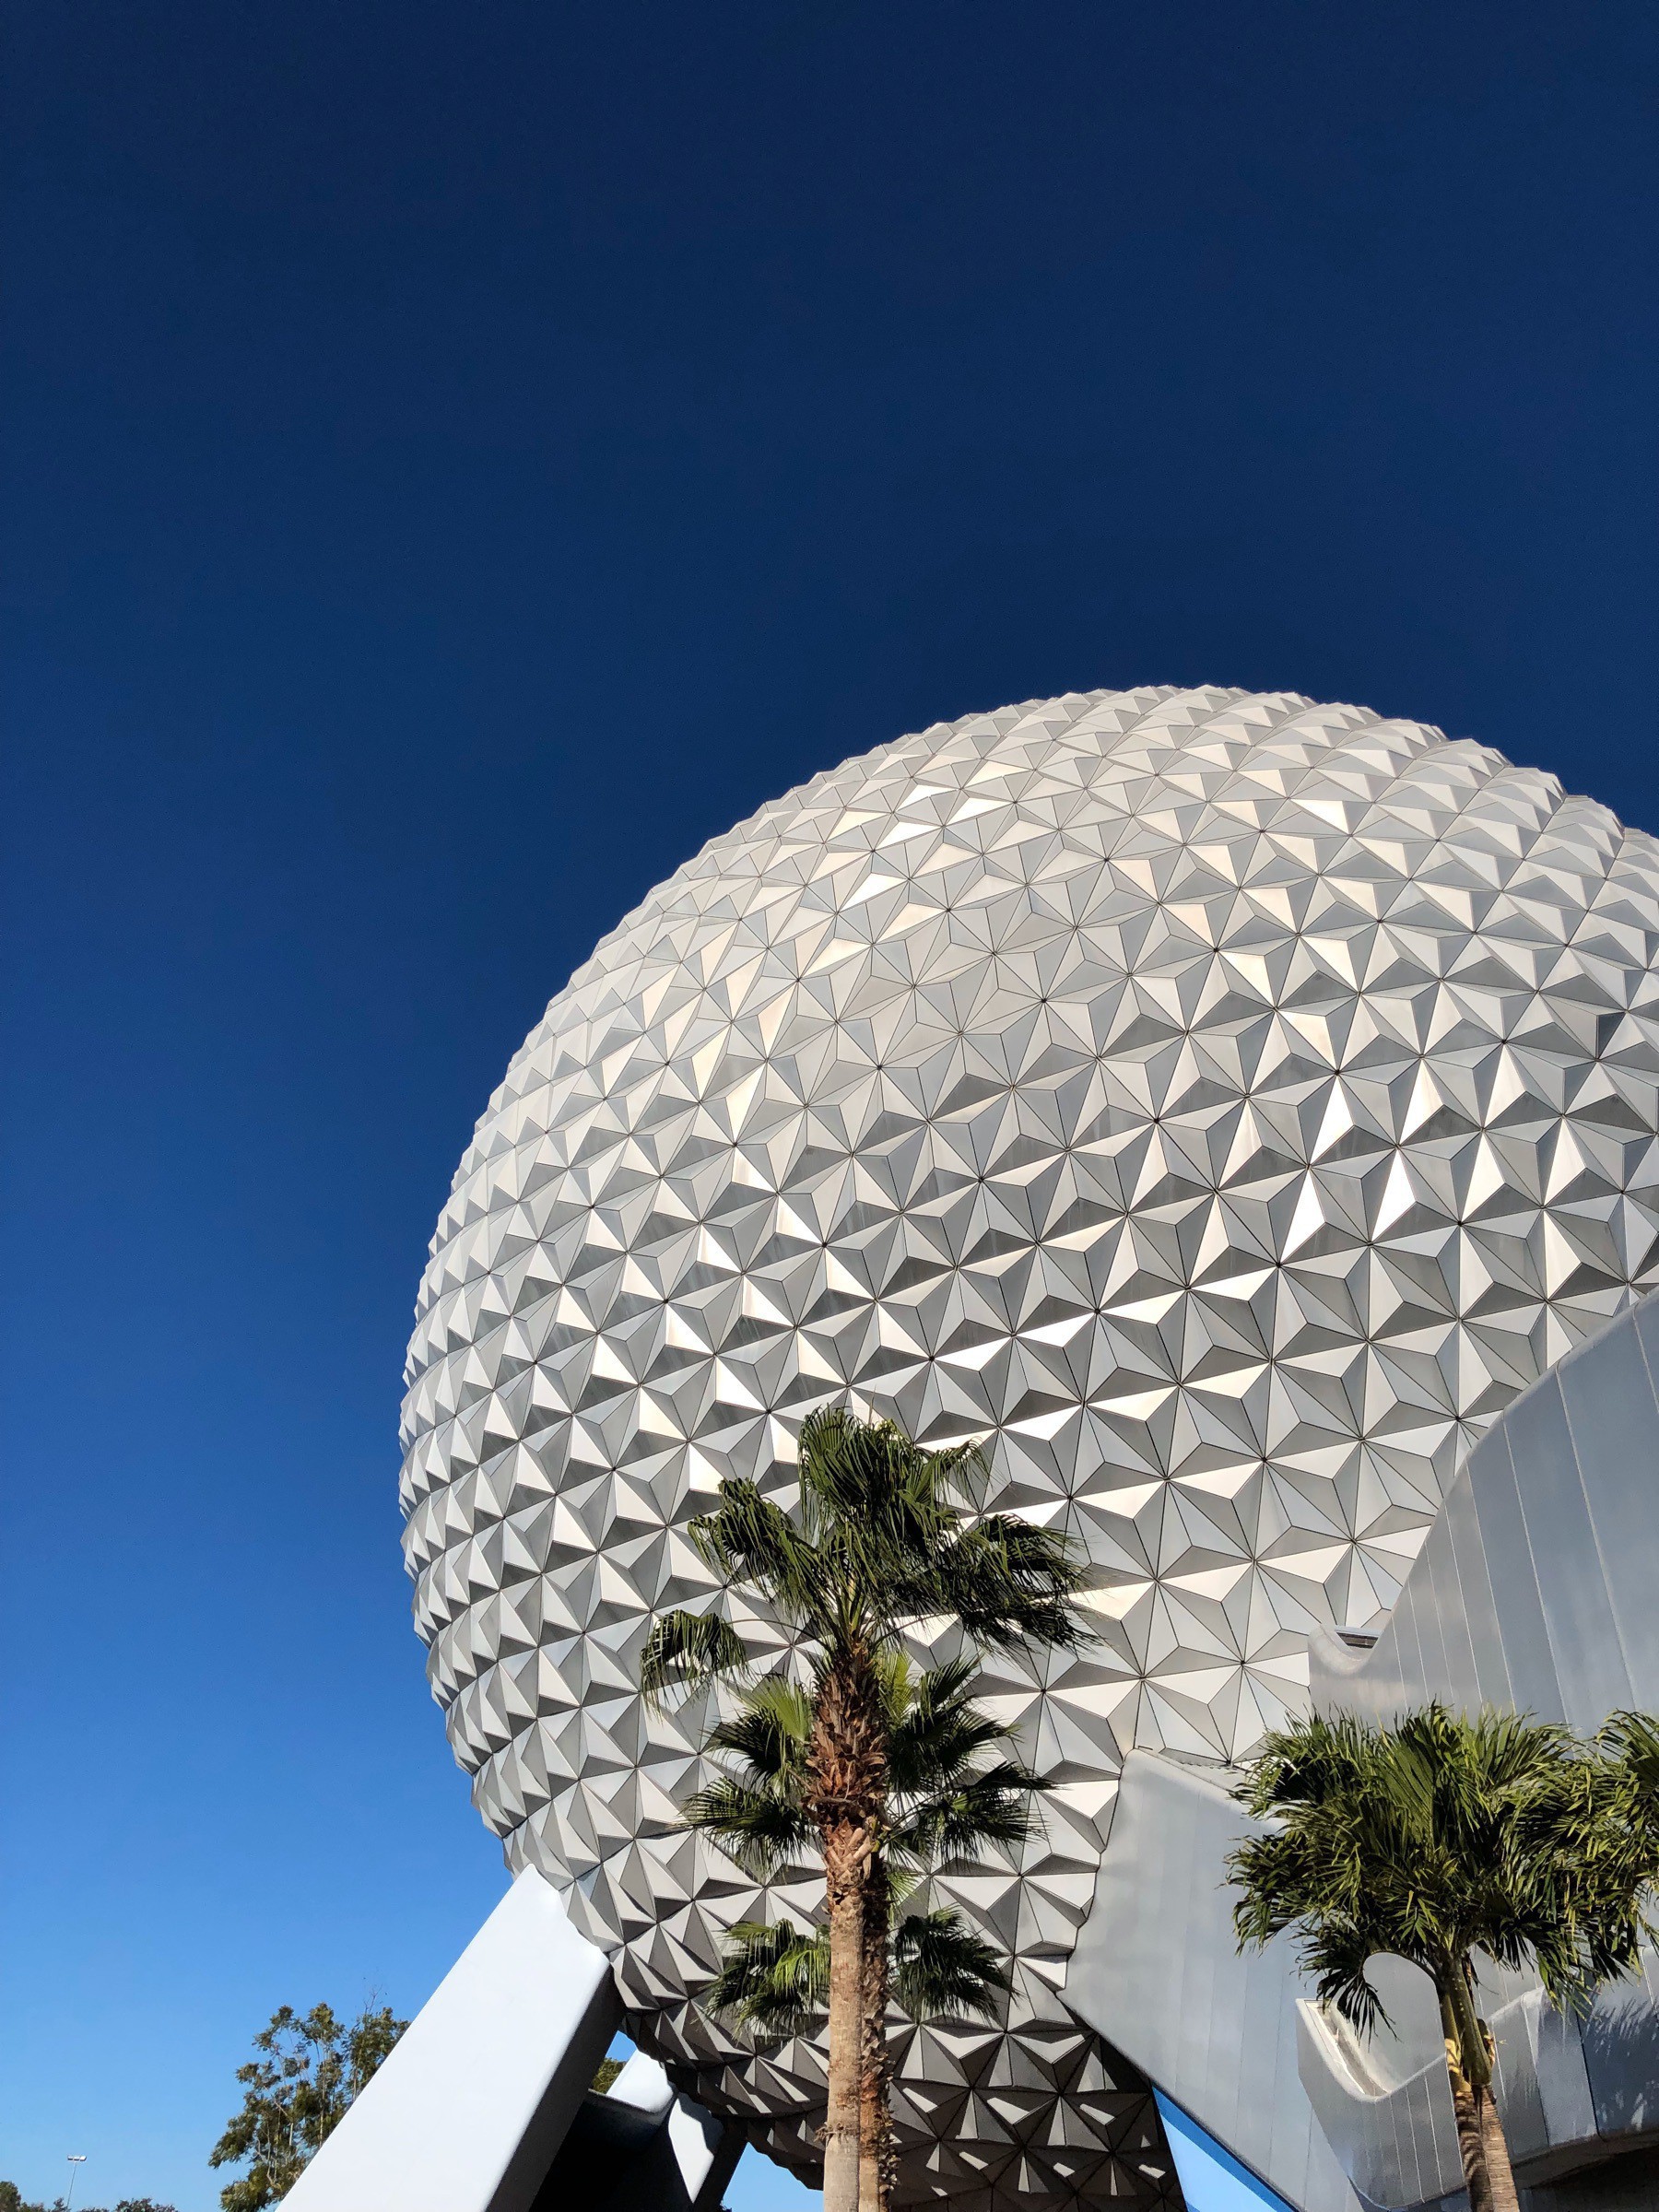 A shot of Spaceship Earth showing in the right-hand side of the photo against a brilliant blue sky.